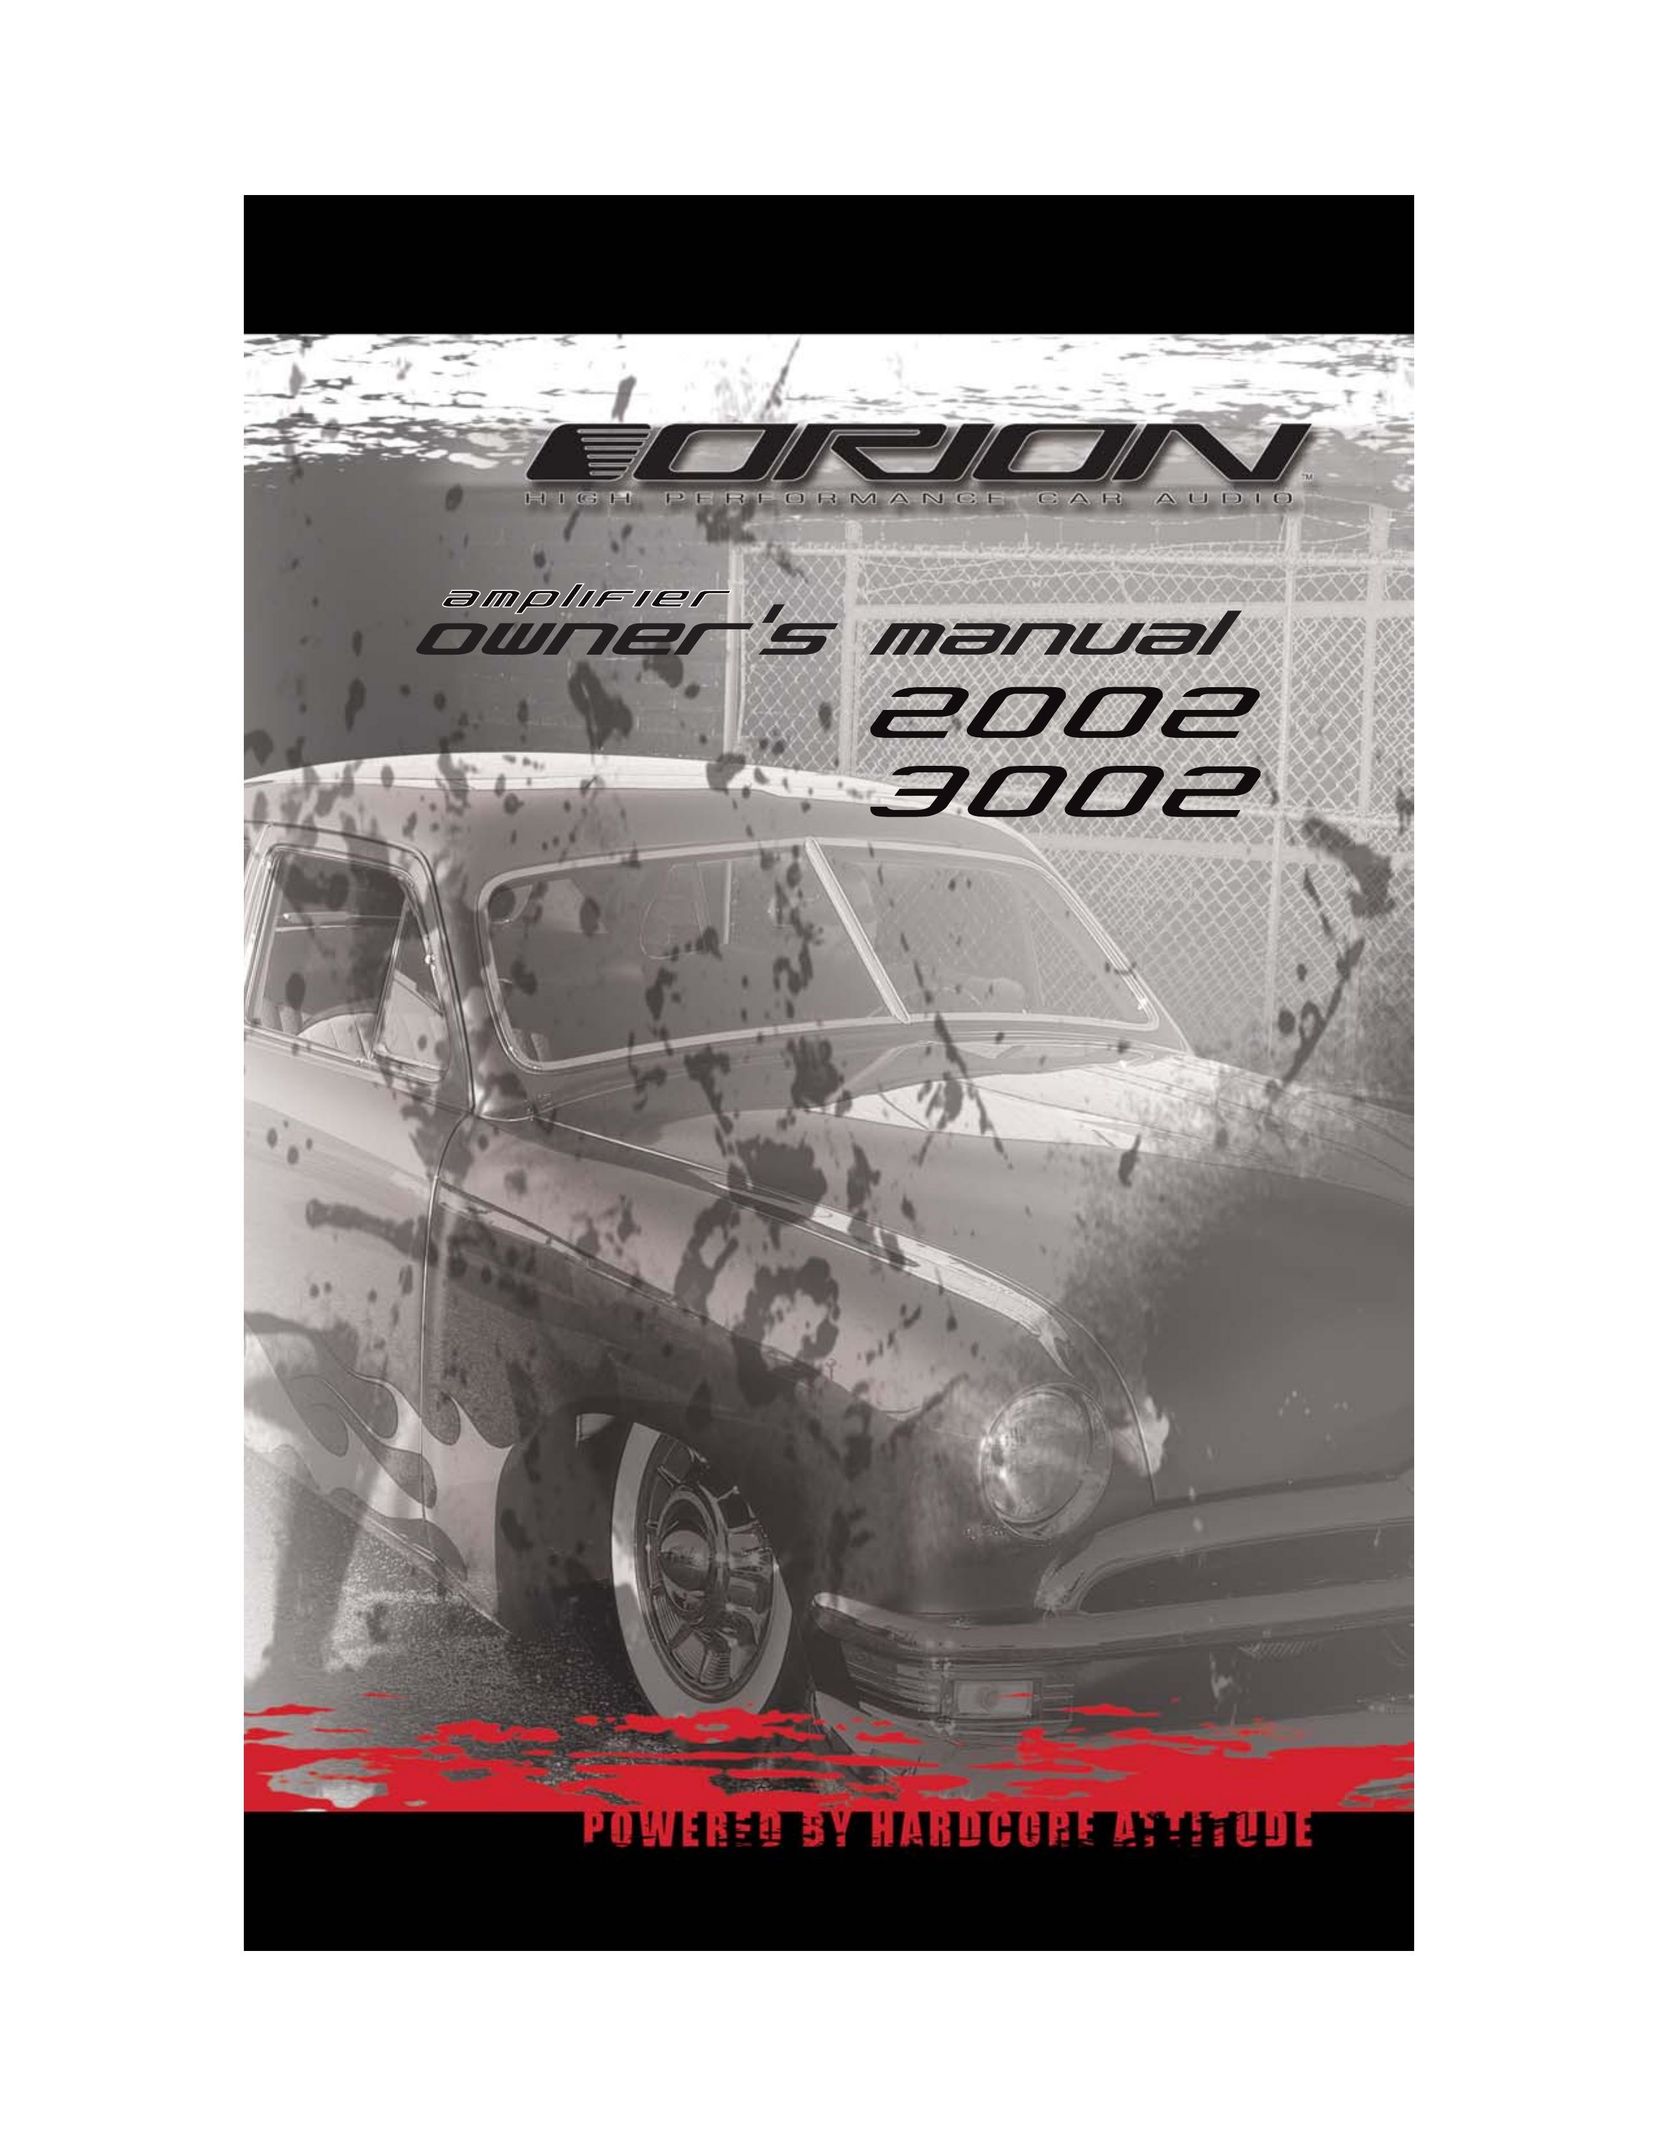 Orion Car Audio 2002 Stereo Amplifier User Manual